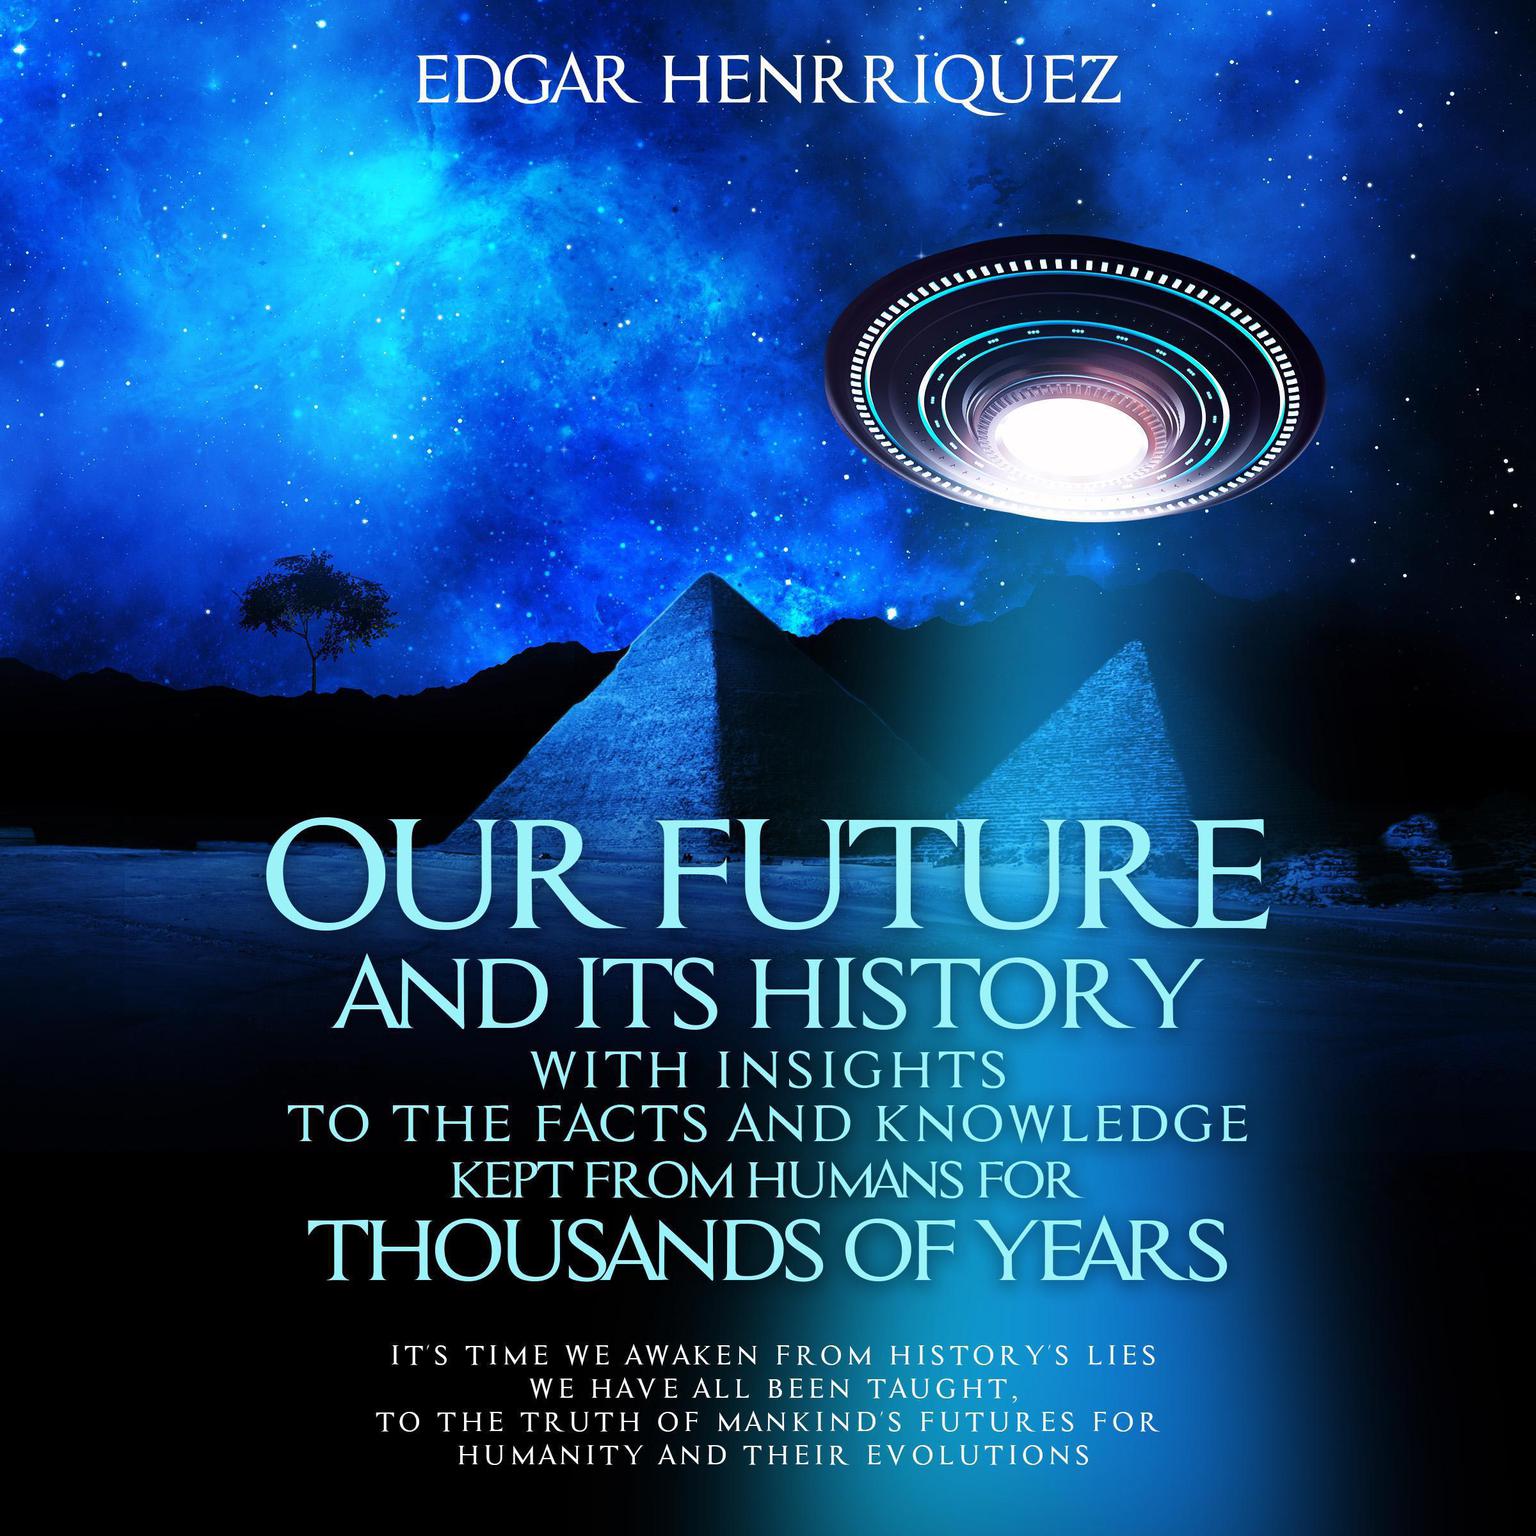 Our Future and Its History with Insights to the Facts and Knowledge Kept from Humans for Thousands of Years: Its time we awaken from historys lies we have all been taught, to the truth of mankinds futures for humanity and their evolutions Audiobook, by Edgar Henrriquez